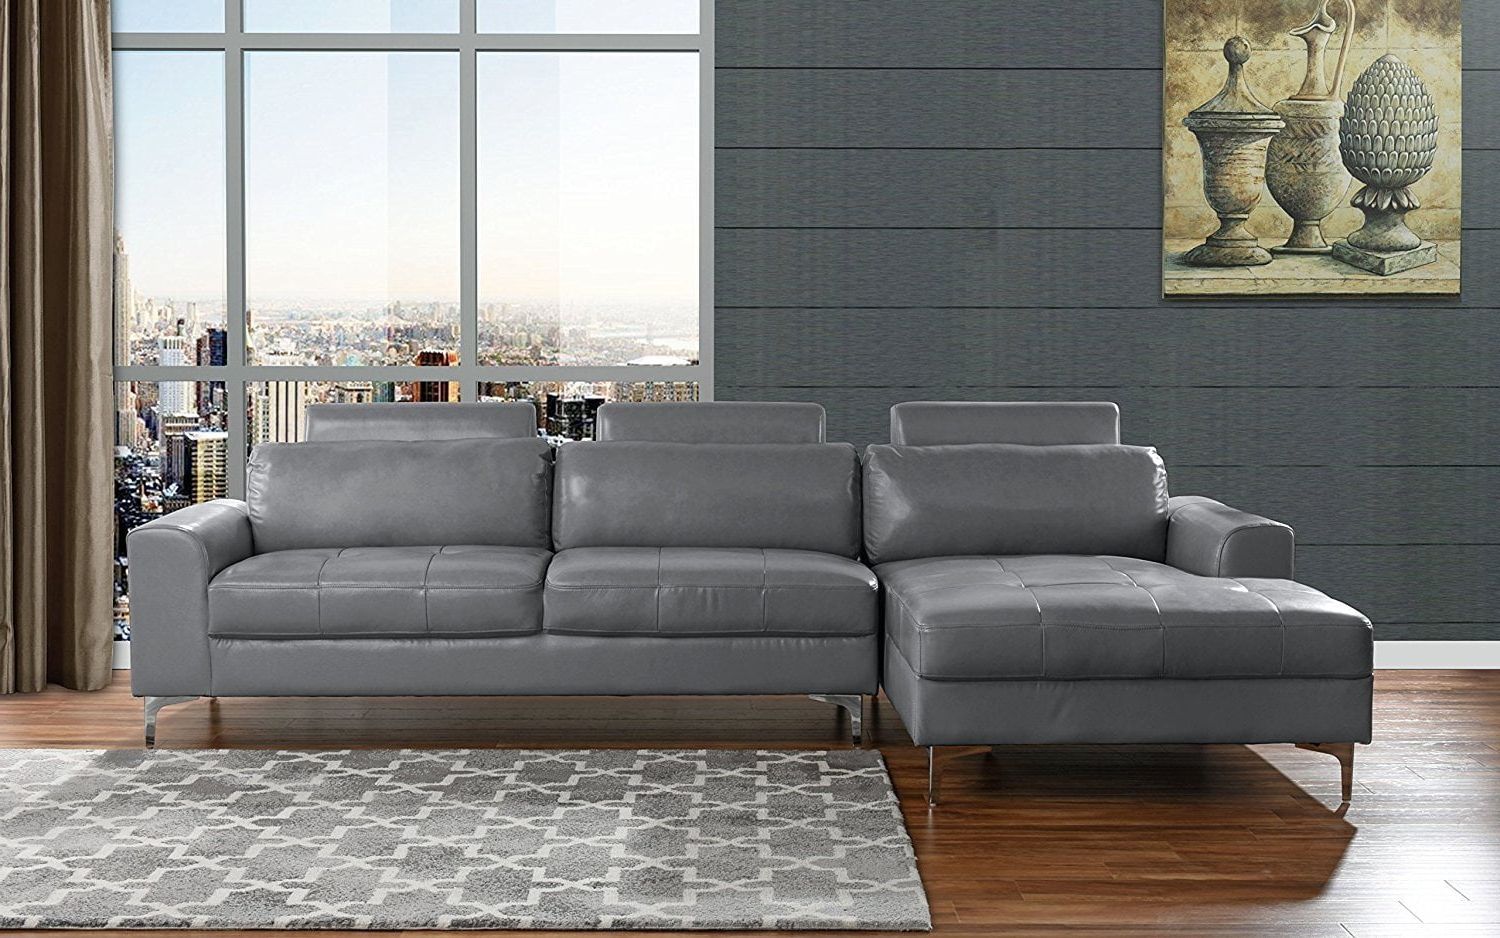 Modern Large Leather Sectional Sofa, L Shape Couch With Extra Wide Inside Modern L Shaped Sofa Sectionals (View 11 of 20)